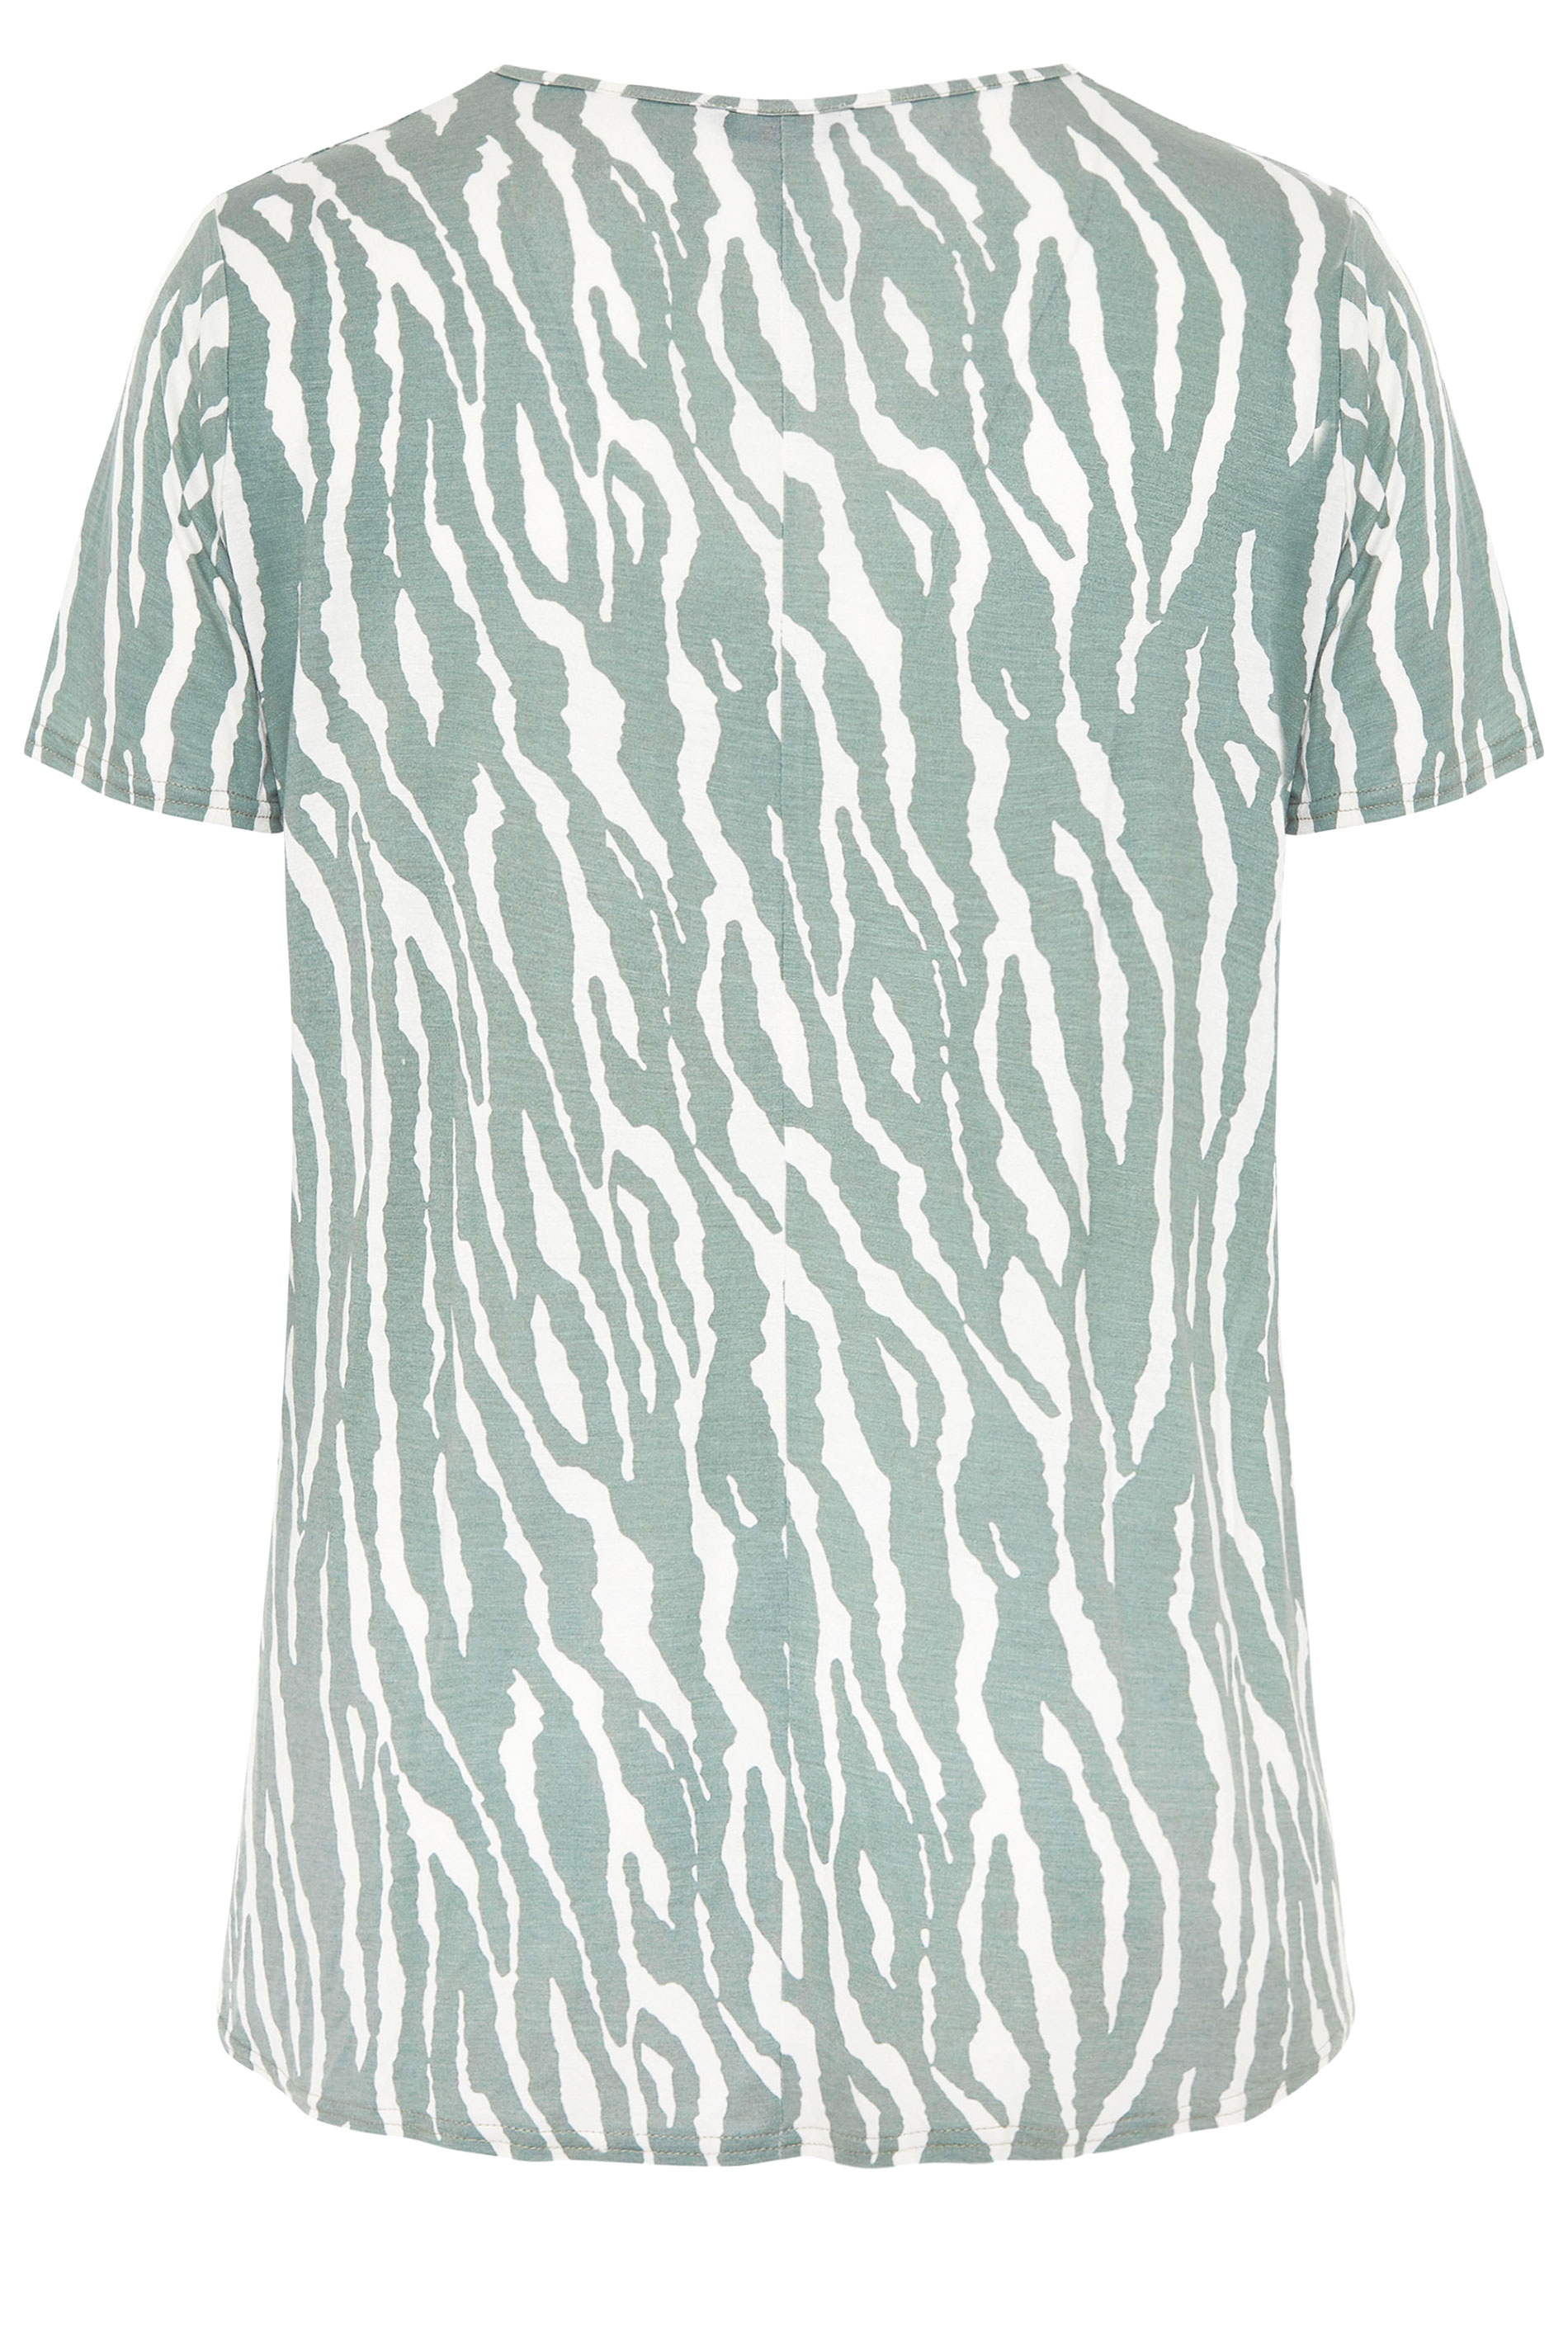 LIMITED COLLECTION Sage Green Zebra Print Swing Top | Yours Clothing